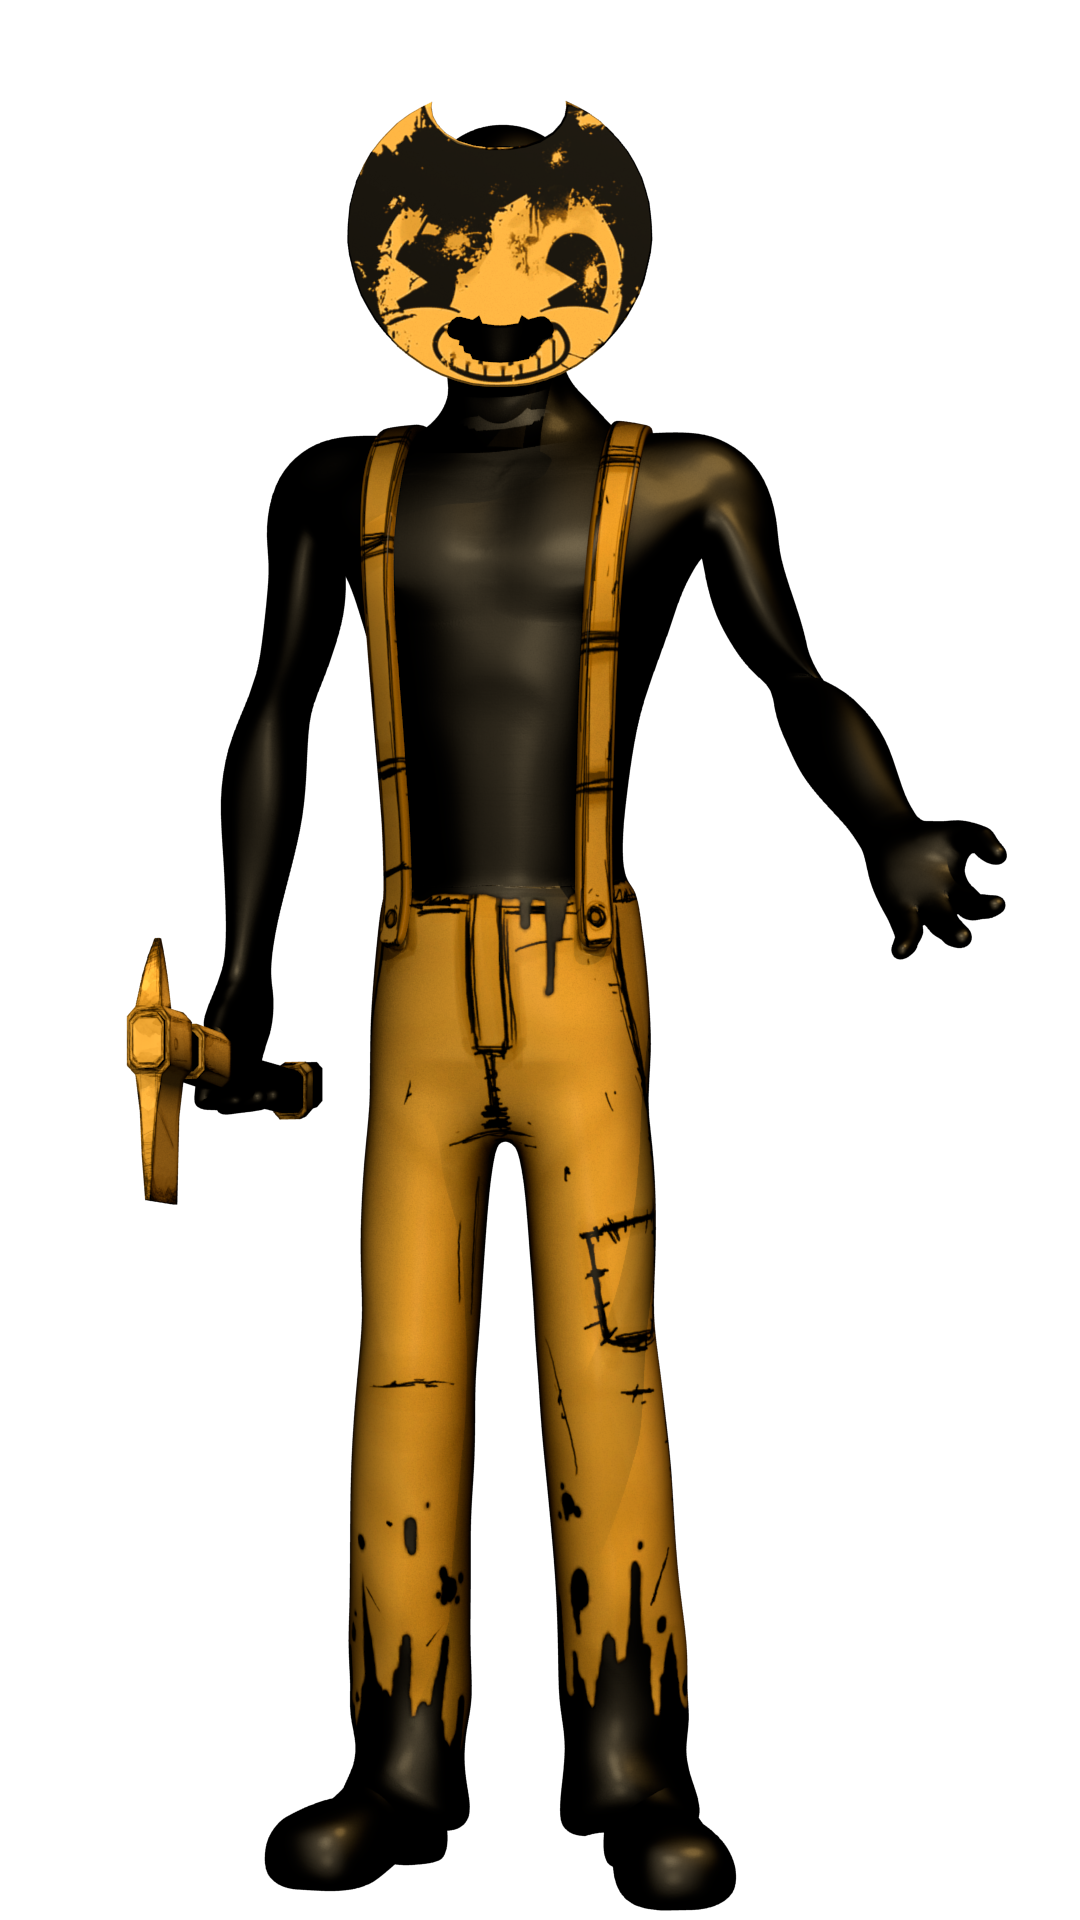 Bendy And The Ink Machine Sammy Lawrence Sammy Lawrence/Gallery | Villains Wiki | FANDOM powered by Wikia